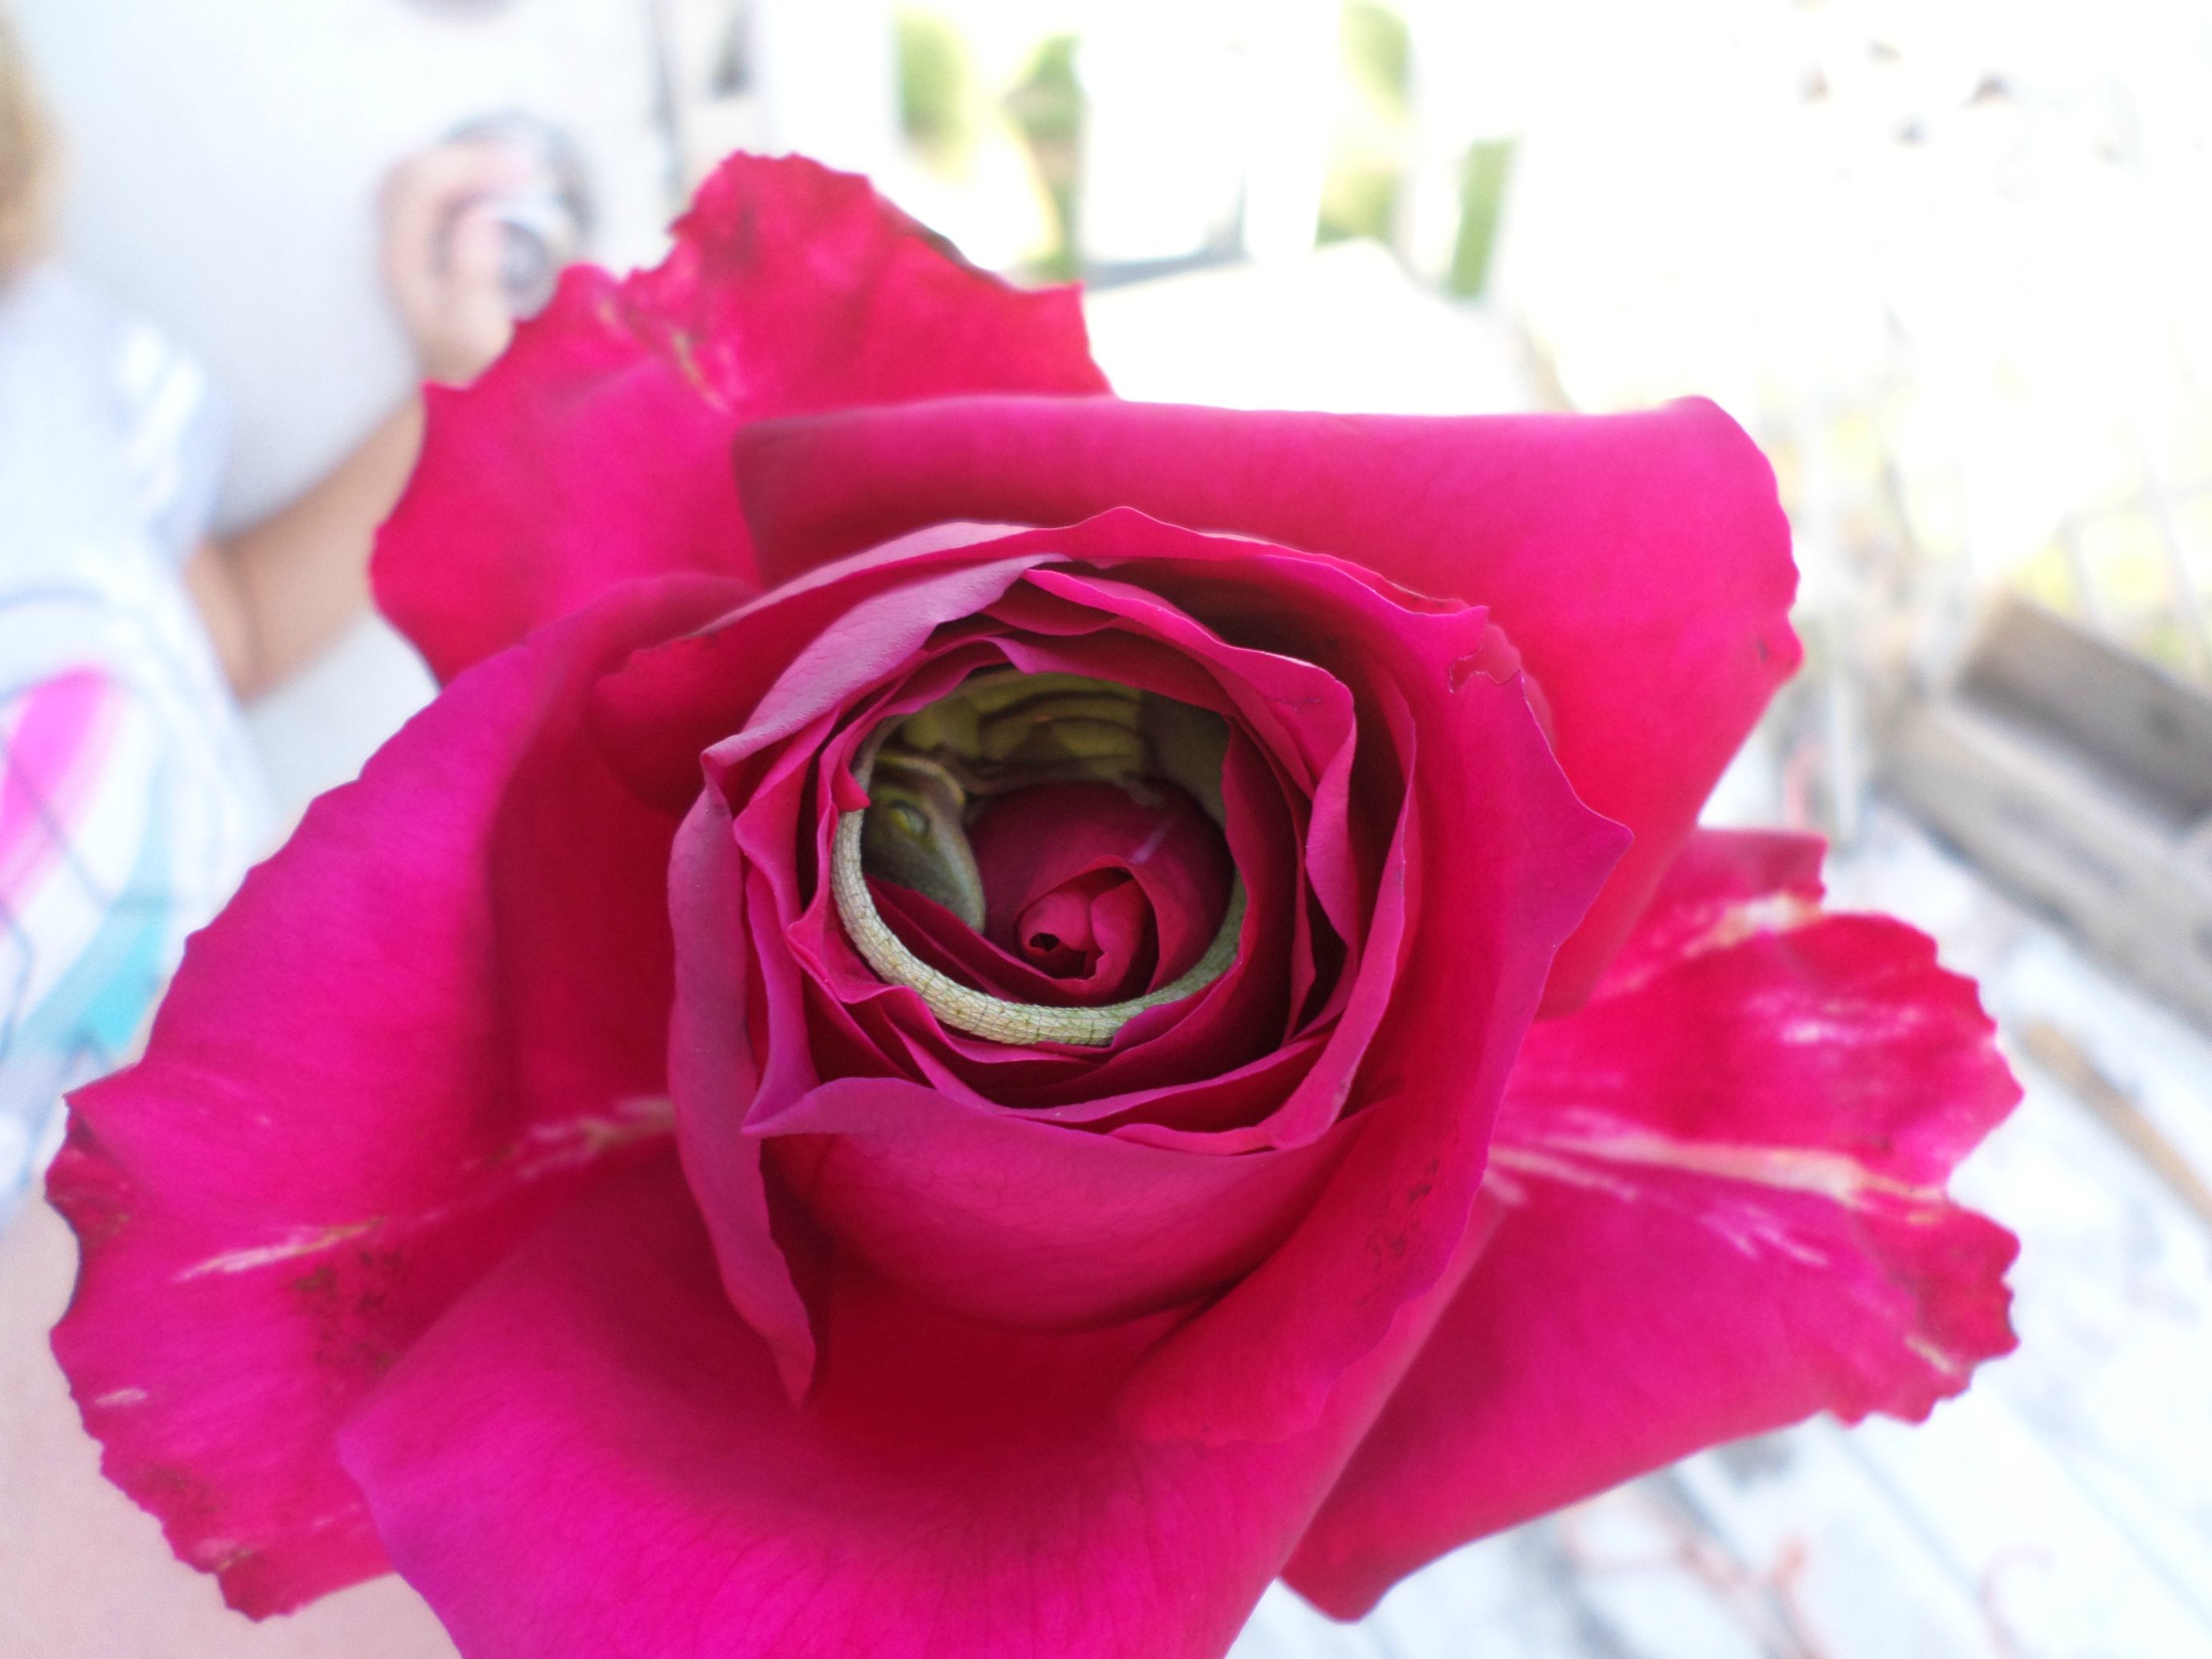 ”My daughter picked me a rose… We got a surprise when we went to smell it”